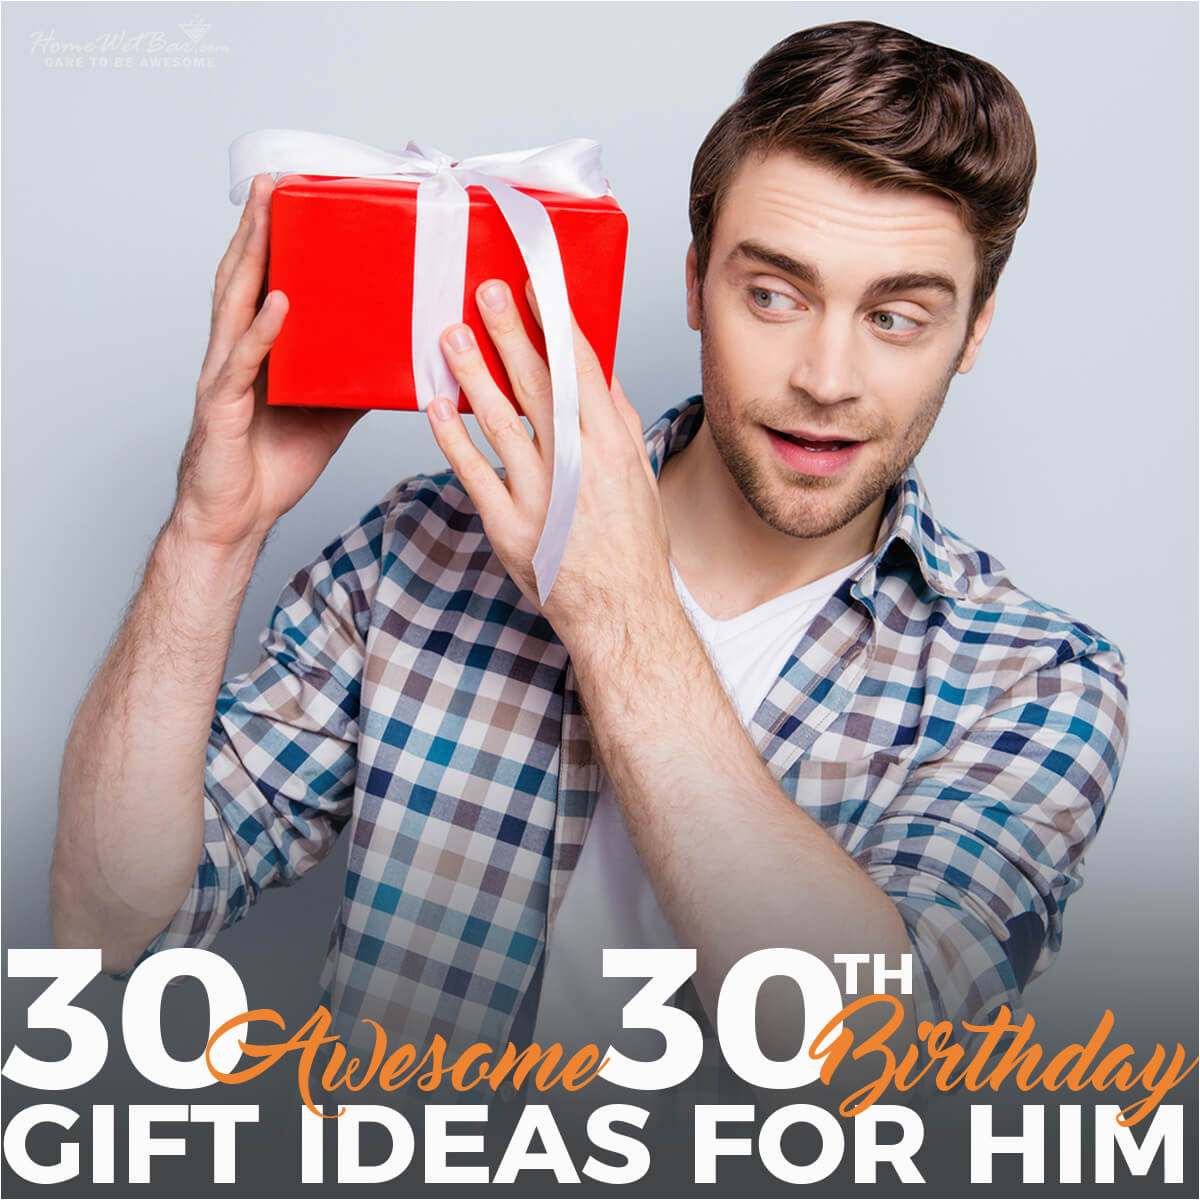 30 Year Old Birthday Gifts for Him 30 Awesome 30th Birthday Gift Ideas for Him